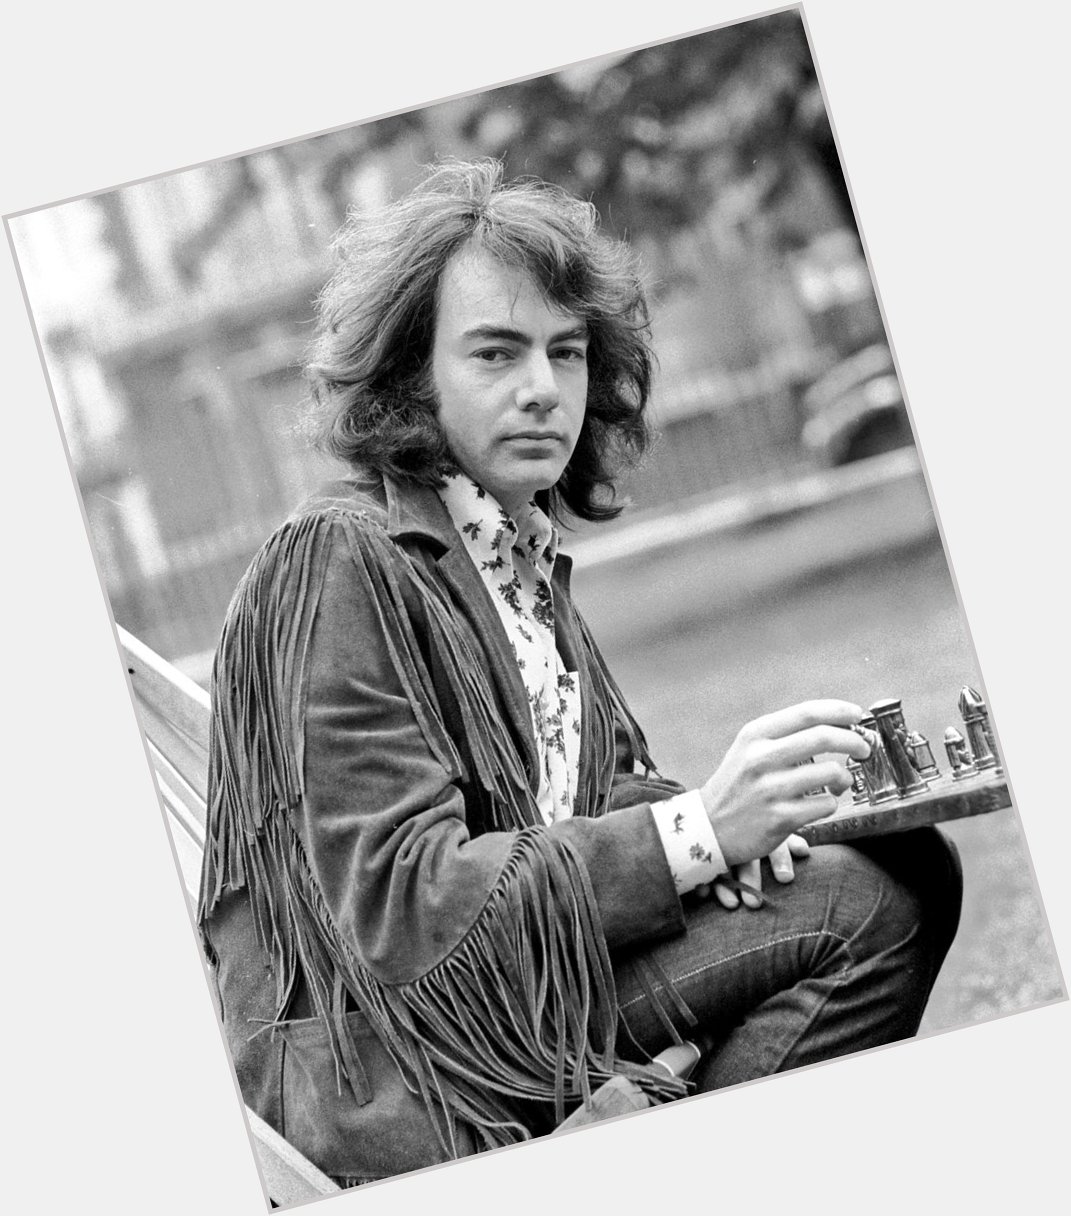 Happy Birthday to American singer songwriter Neil Diamond, born on this day in Brooklyn, New York in 1941.   